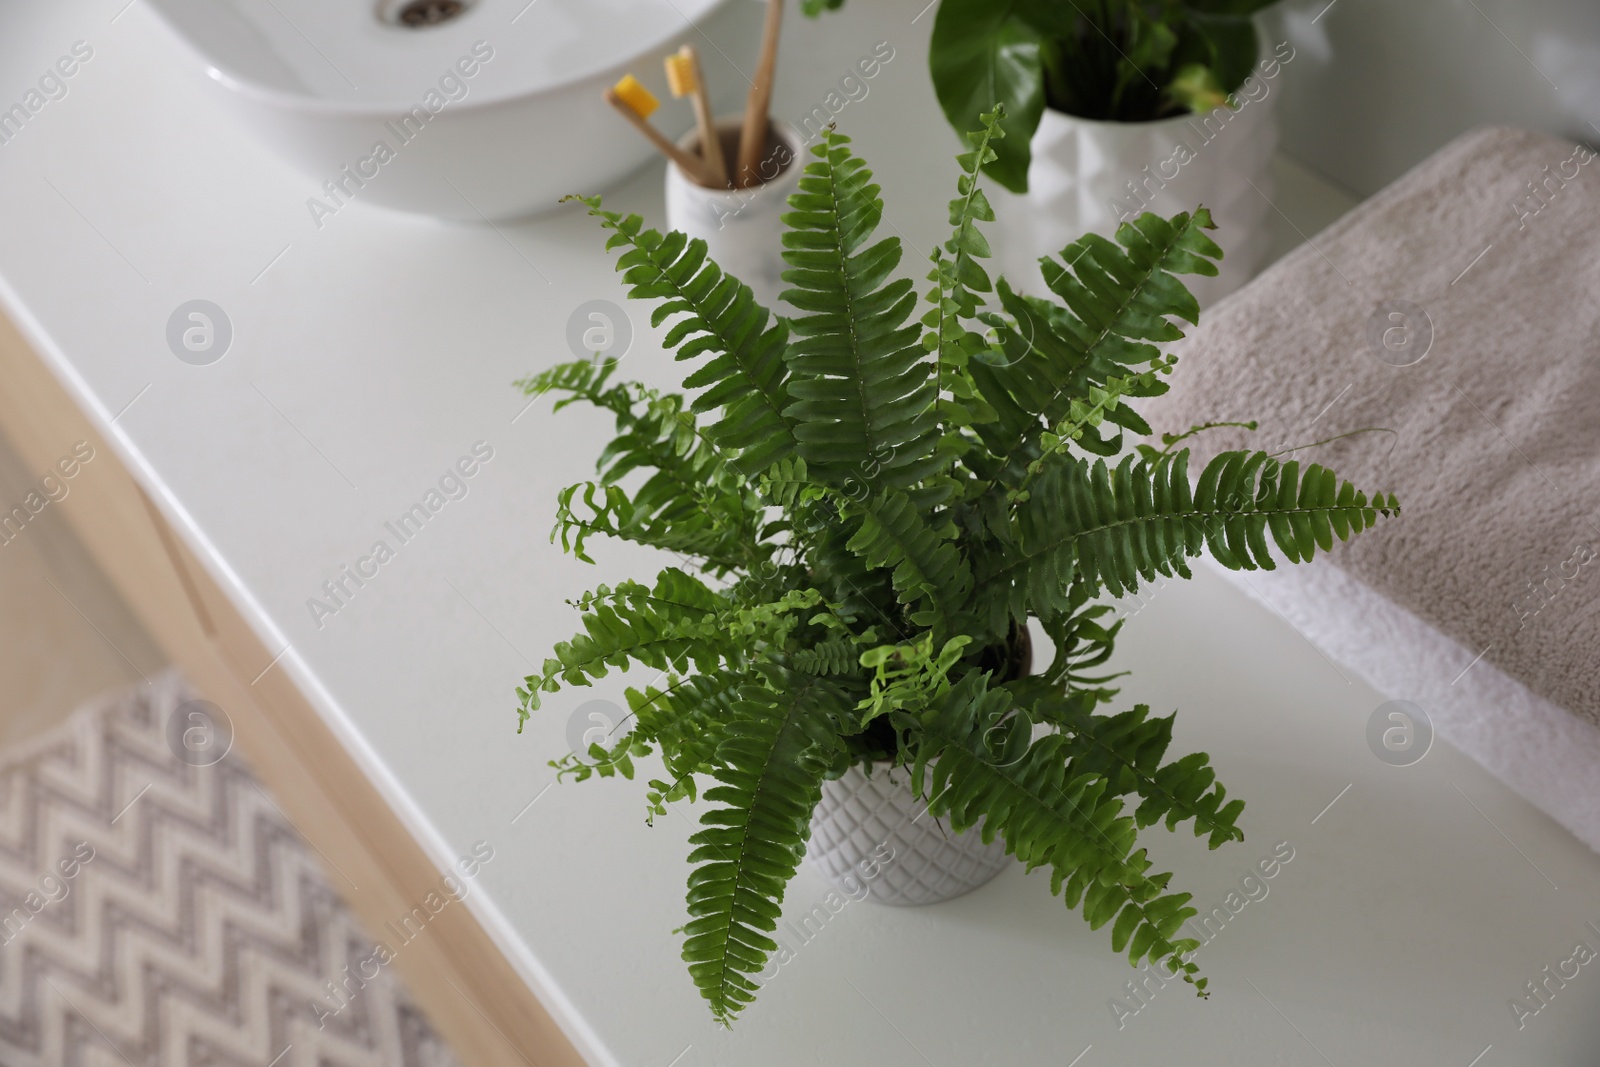 Photo of Beautiful green ferns, towels and toothbrushes on countertop in bathroom